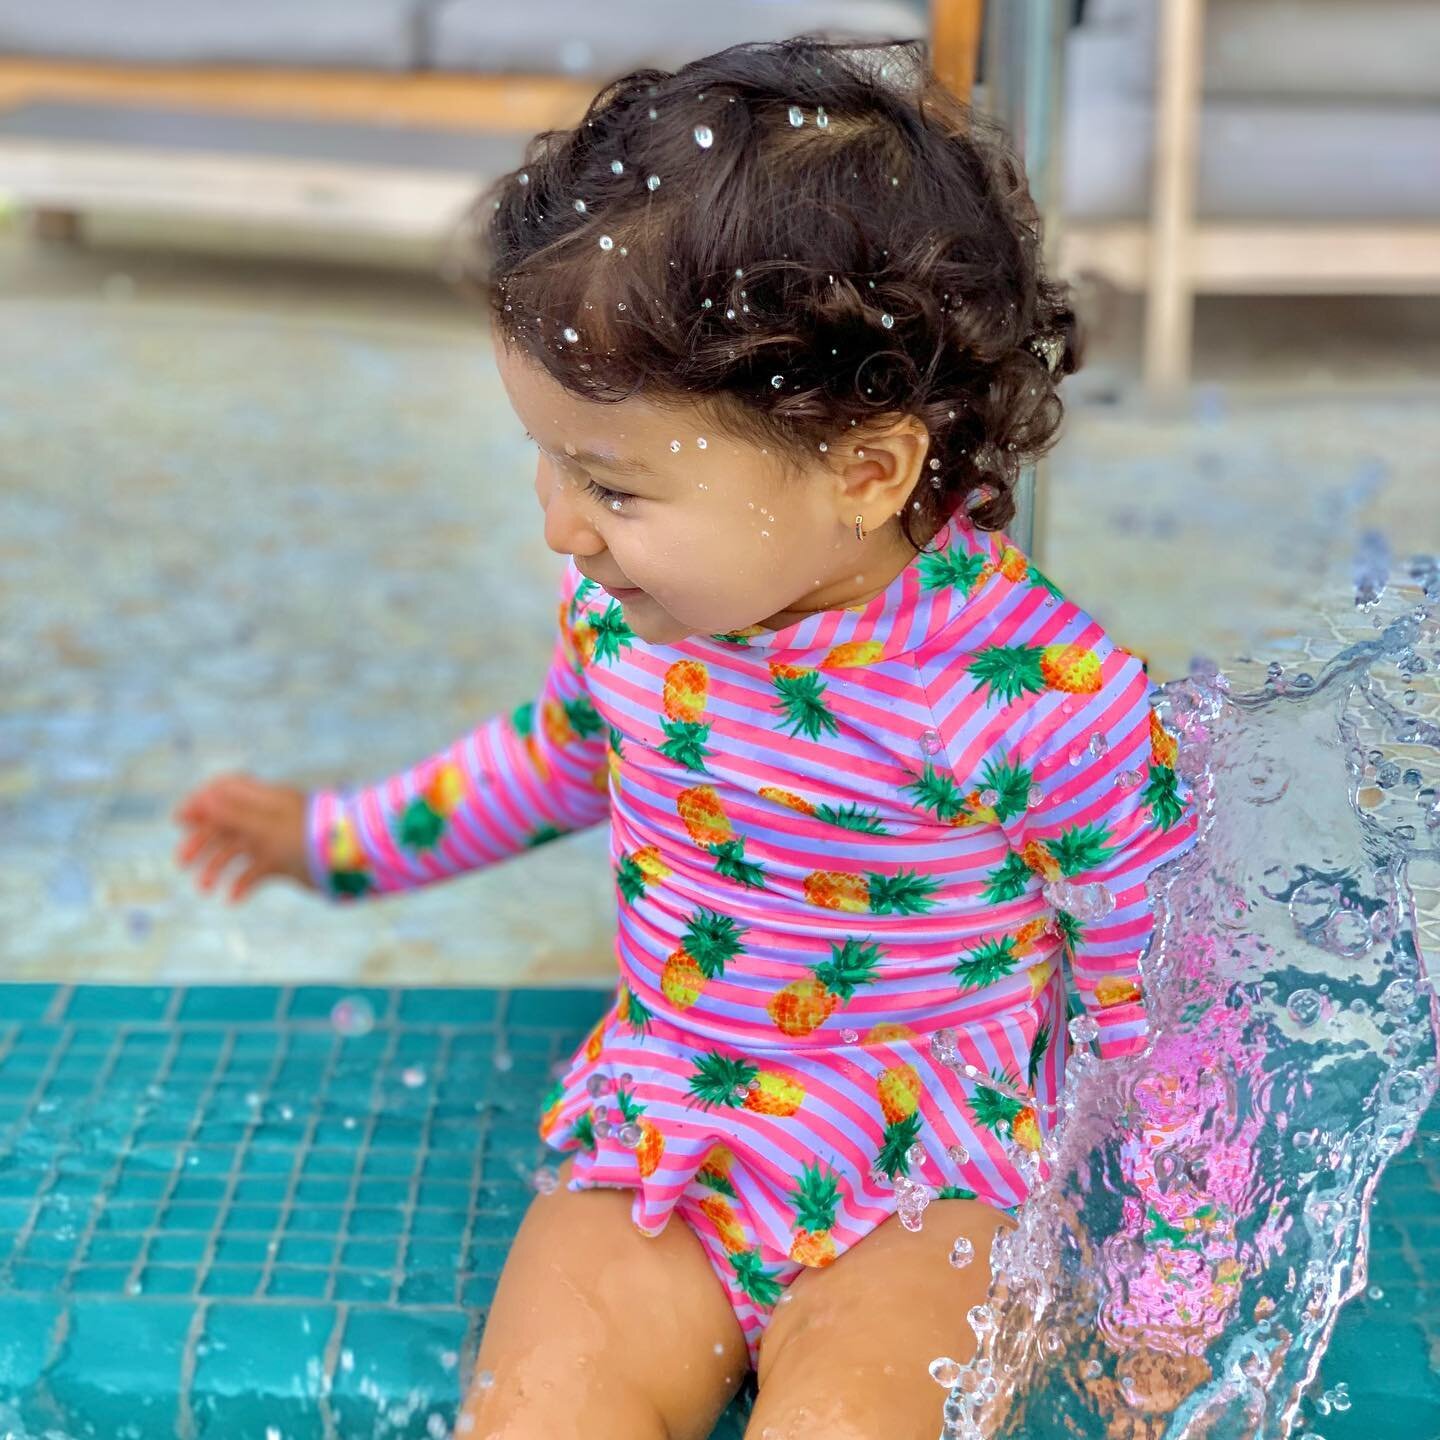 Kicks &amp; Splashes 🦶🏼💗💦
This little mini student only had a handful lessons and her progress is beyond amazing! She is not even 2 years old and impresses with her great bubbly personality and fast learning skills!
Not only does she love her kic